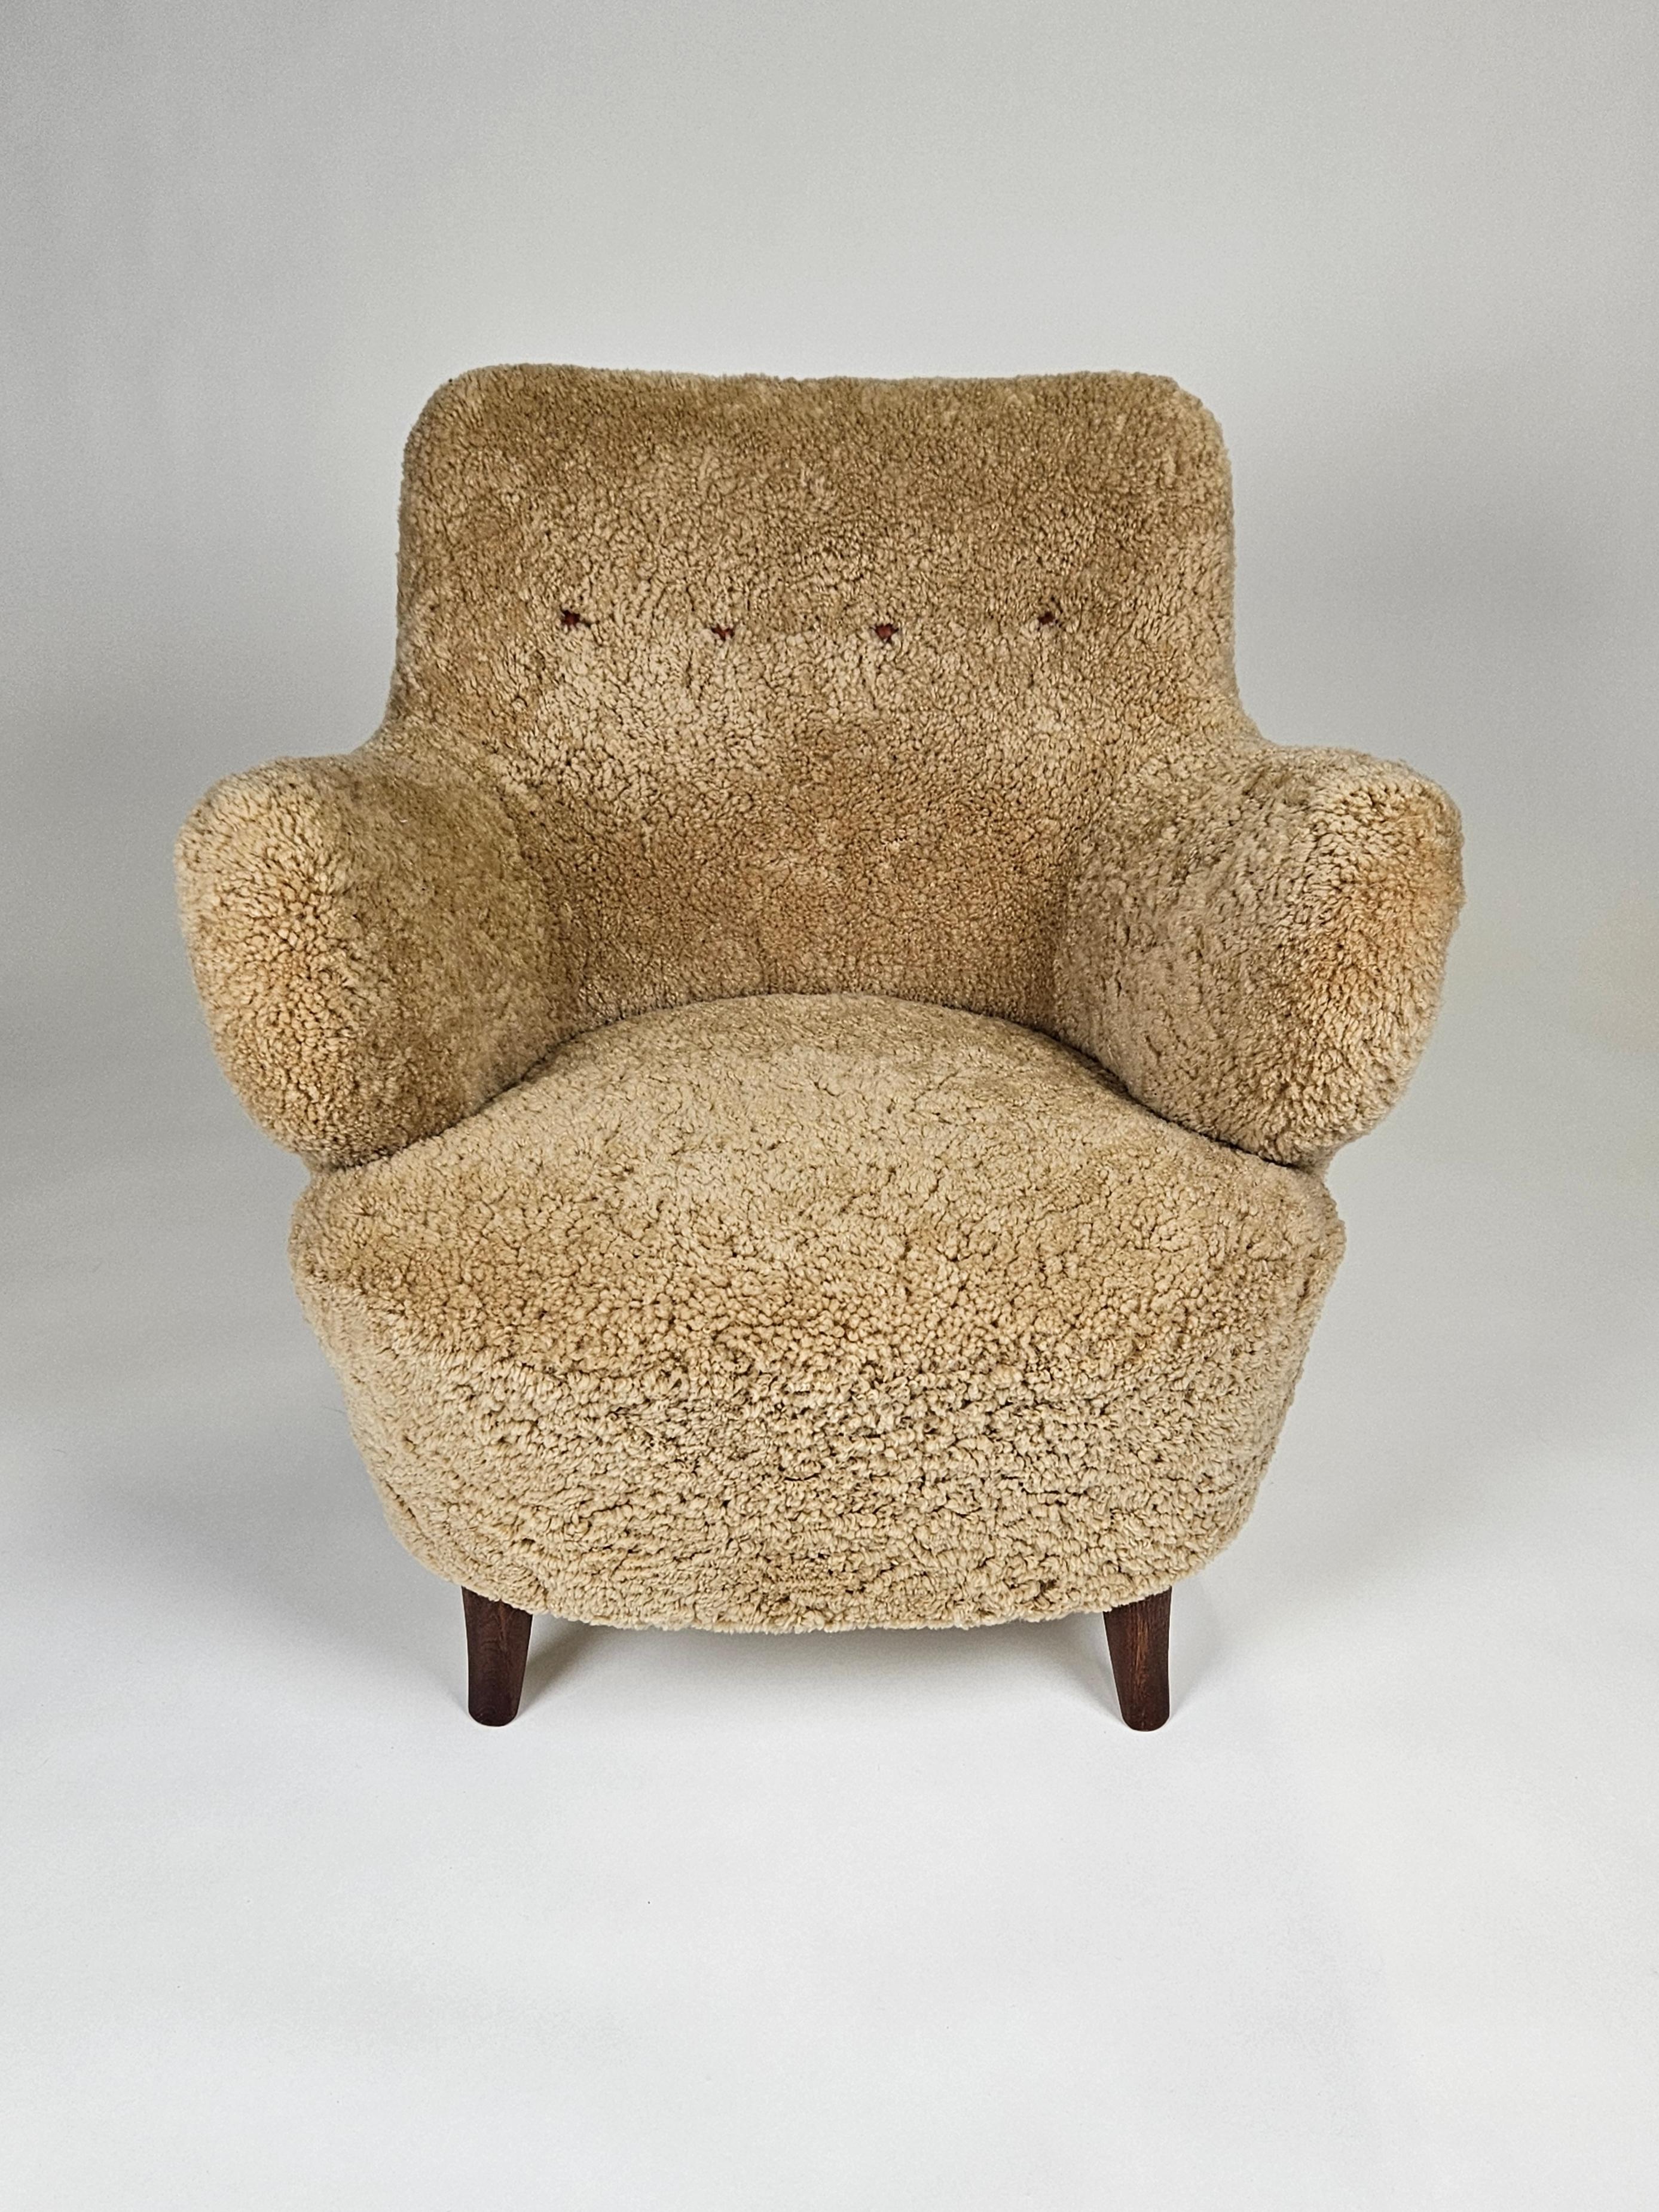 Scandinavian Modern lounge chair designed by Gustav Axel Berg and produced by his own firm AB G.A. Bergs, Sweden, in the 1940s. 

Legs of beech and upholstered in honey colored sheepskin. 

Extremely rare model. 